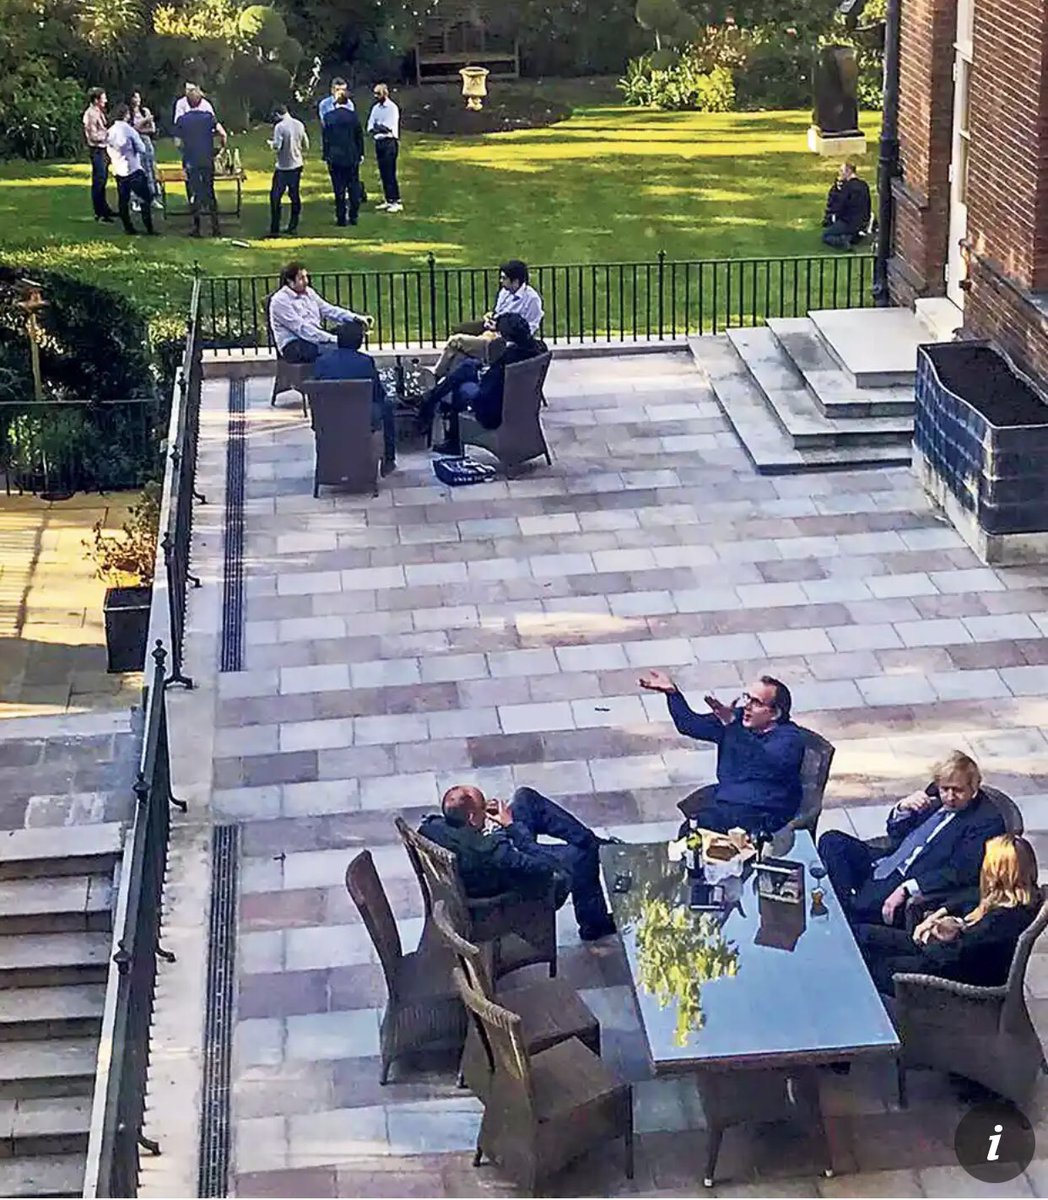 The government insists this picture shows a “work meeting”
- No pens or paper, so no notes or minutes
- No displays, computers or flipcharts
- Table of drinks
- Wine quaffing
- A cheeseboard
Do you believe them?